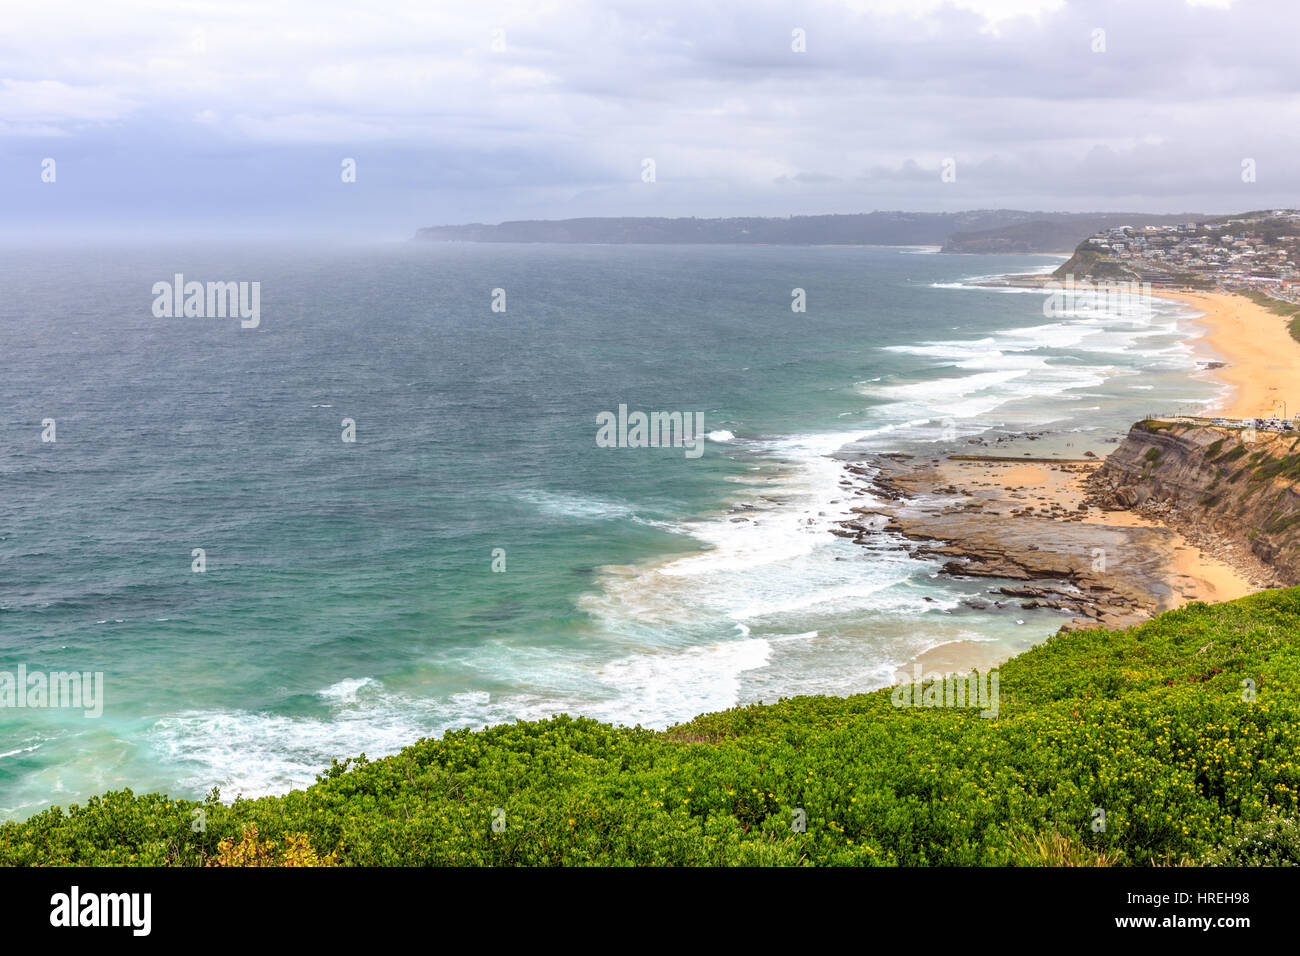 Looking south along the coastline of Newcastle, 2nd city in new south wales with bar beach and merewether beach, Australia Stock Photo